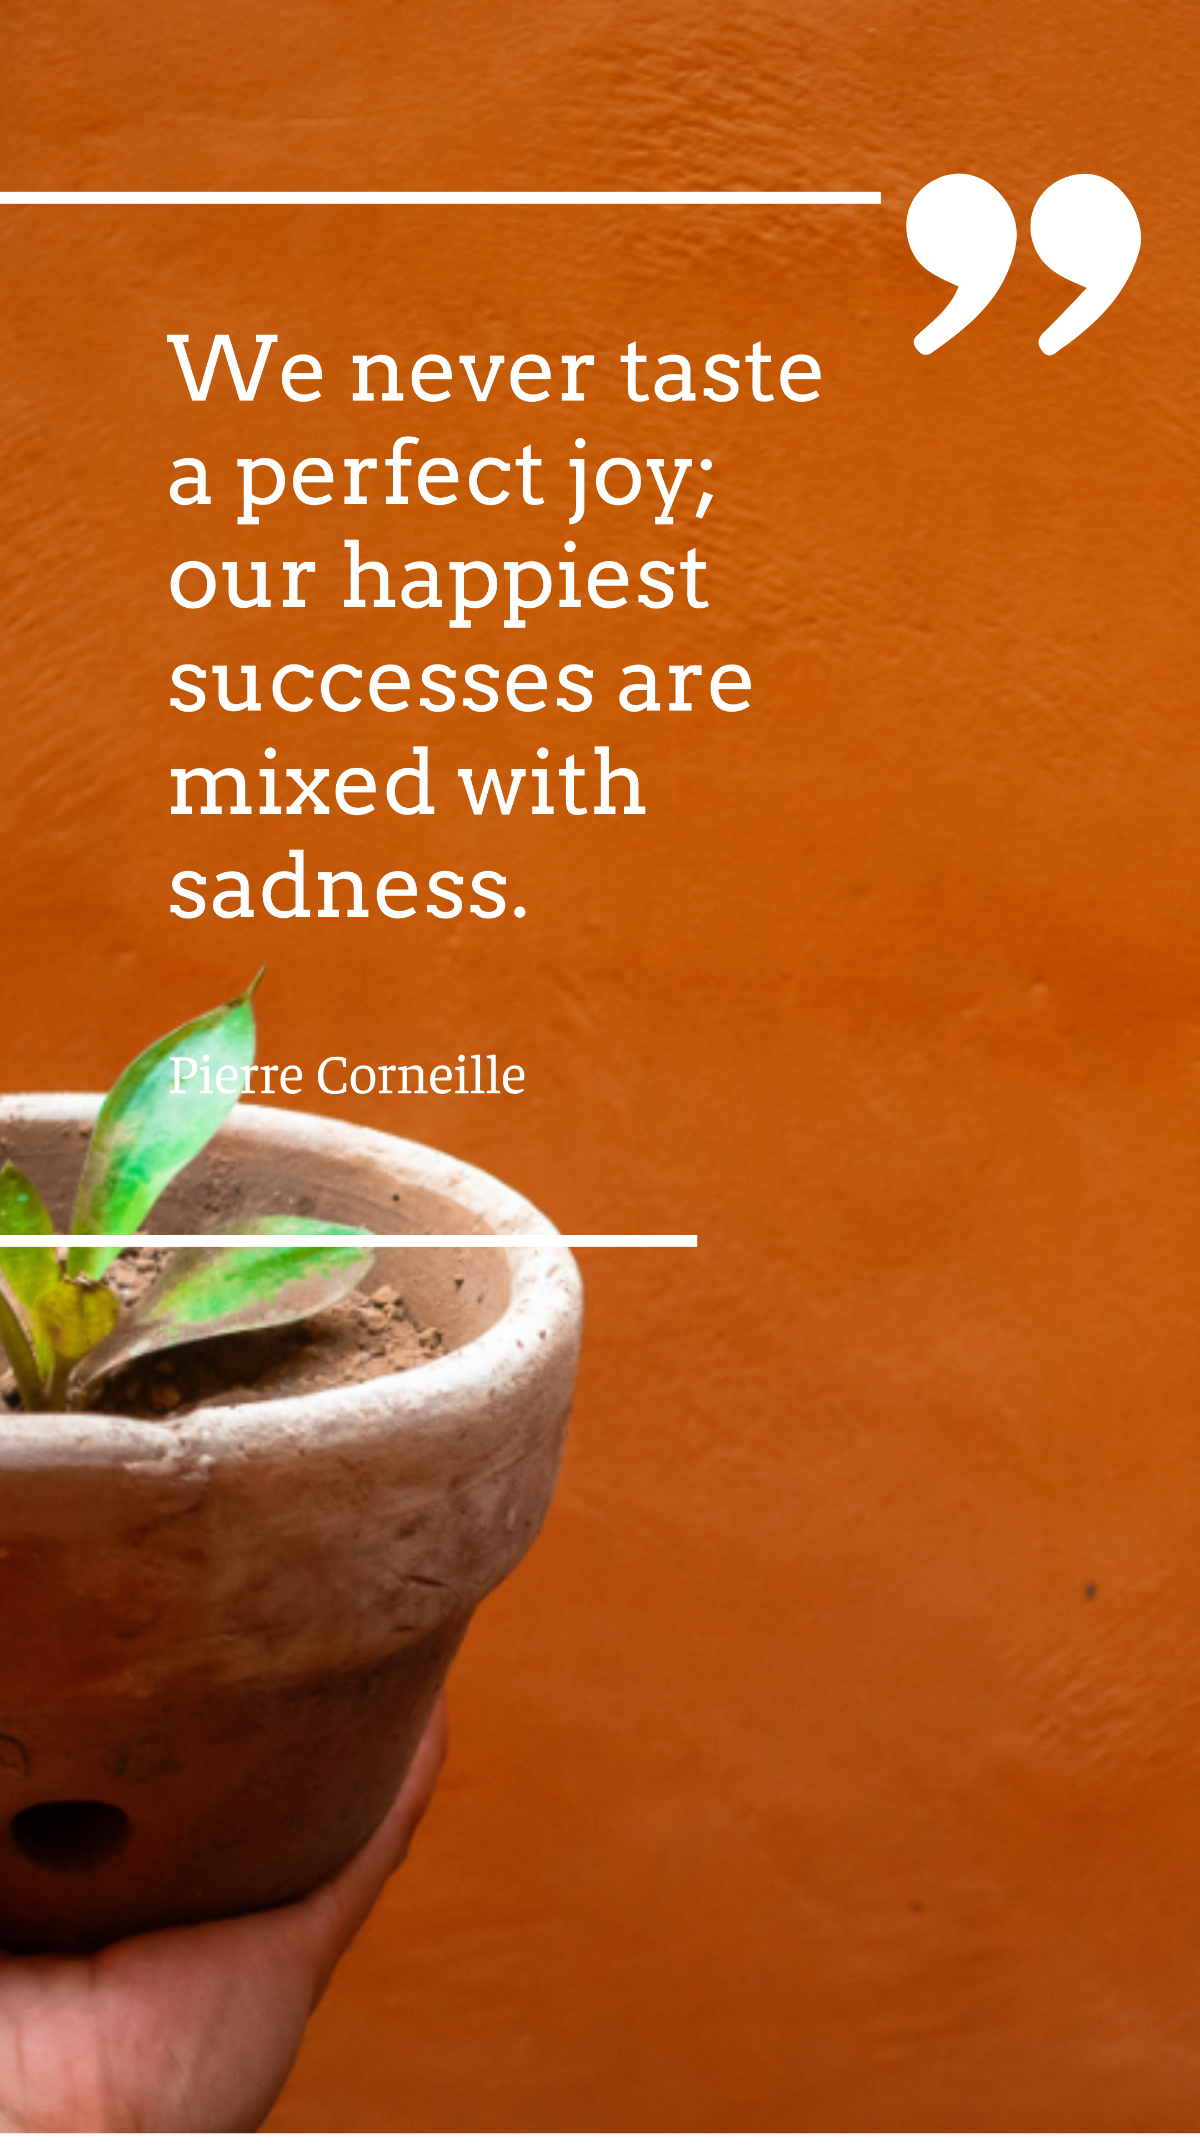 Pierre Corneille - We never taste a perfect joy; our happiest successes are mixed with sadness. Template